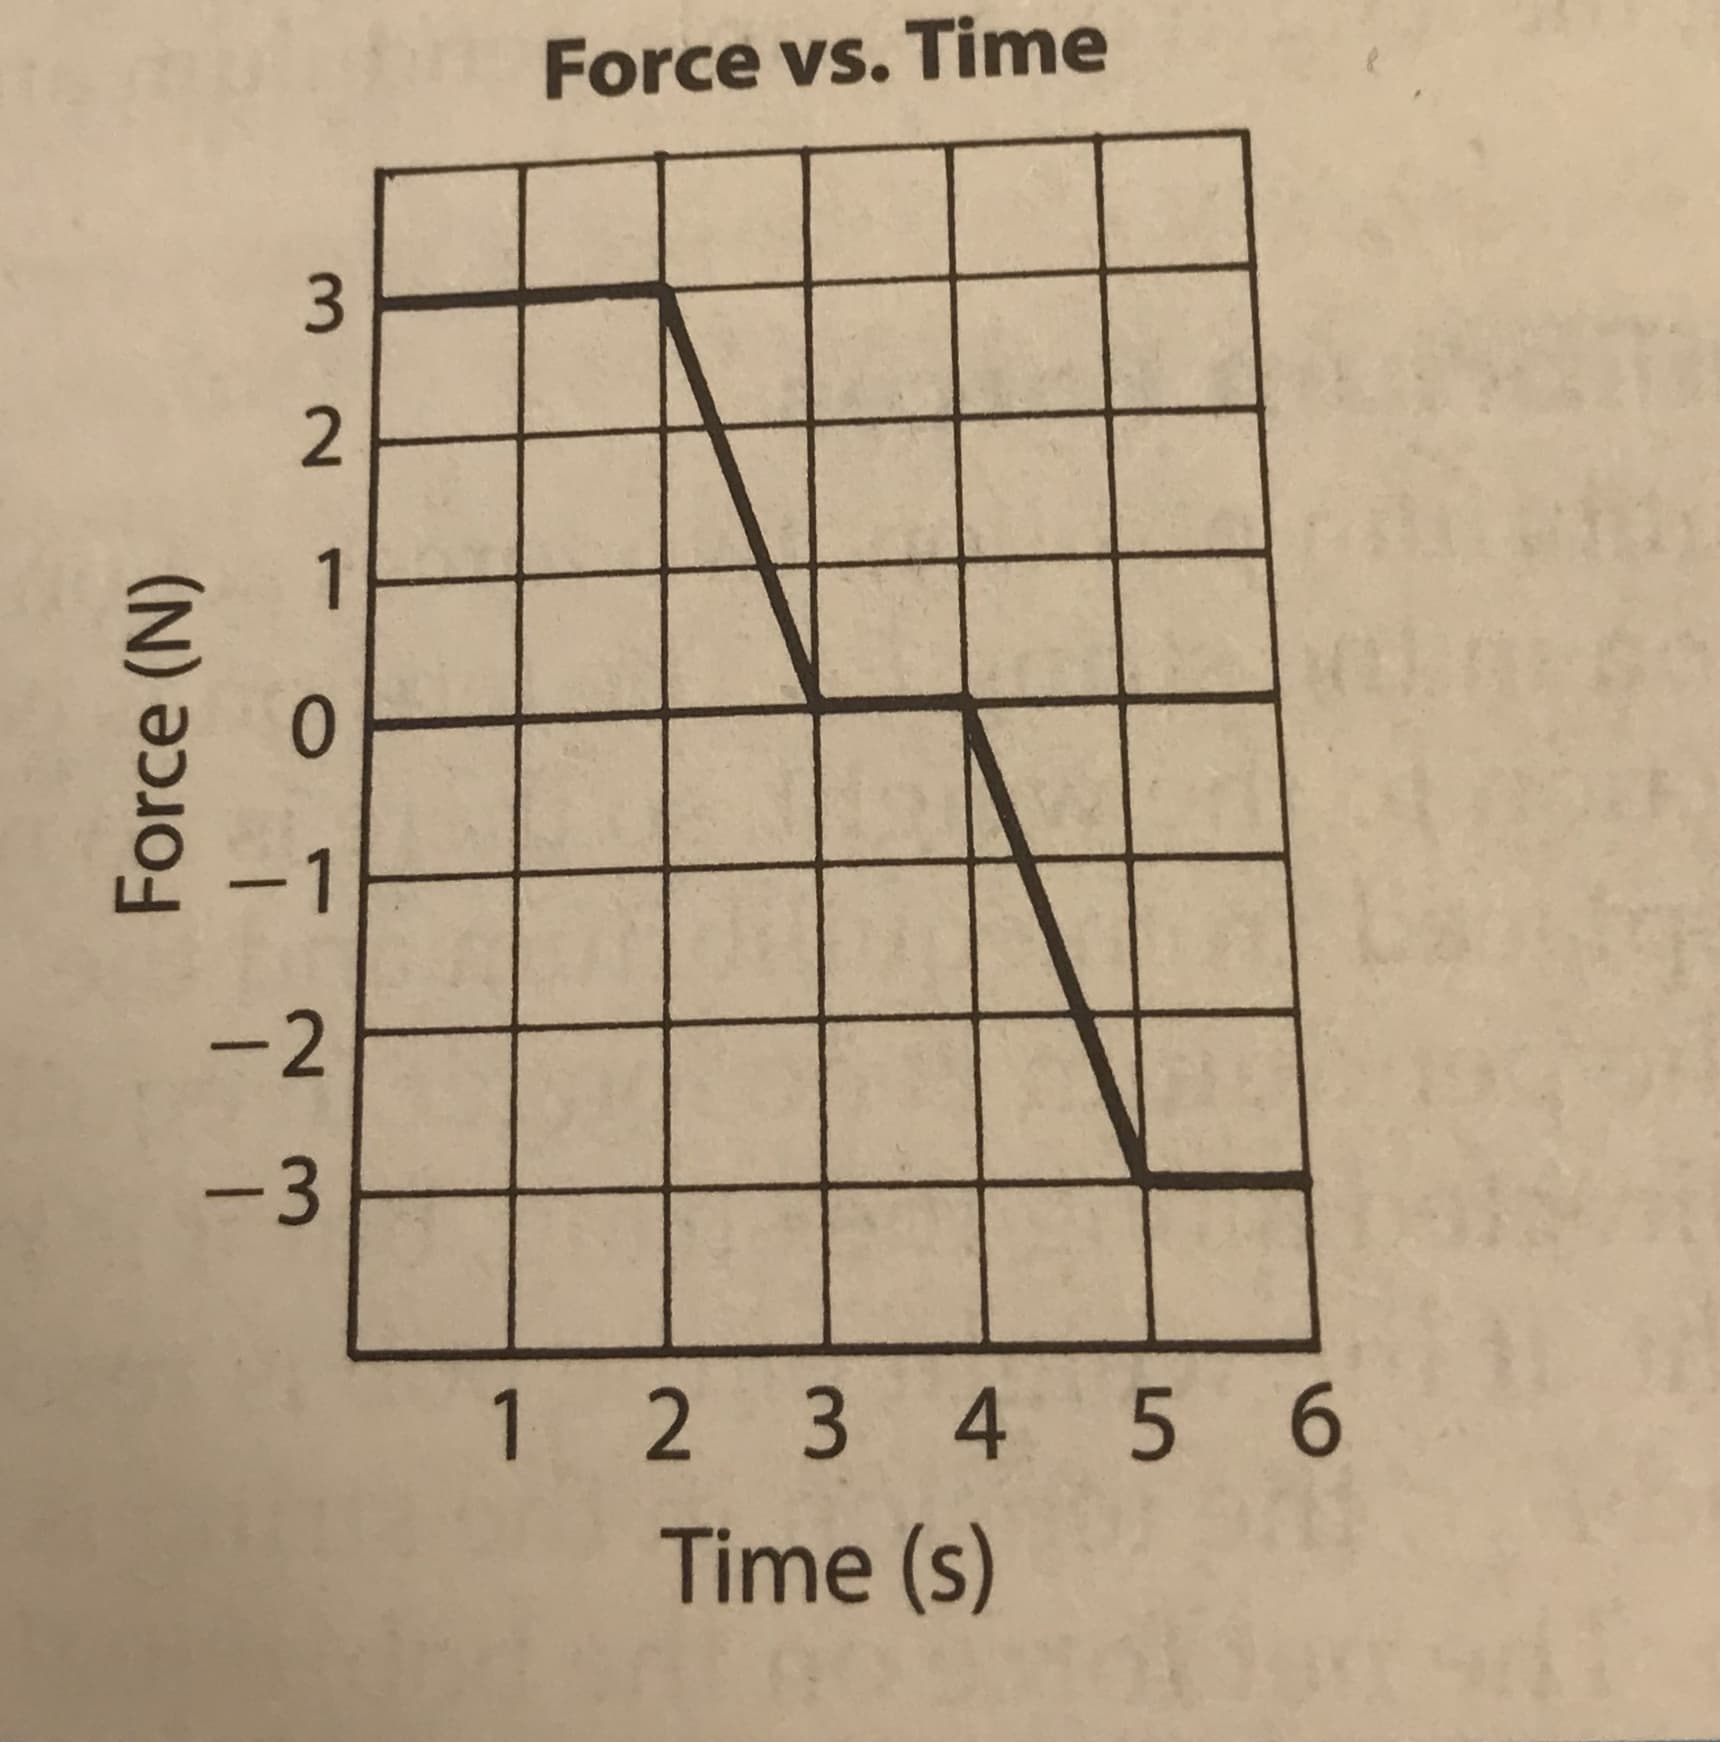 Force vs. Time
2.
0.
-1
-2
-3
1 2 3 4 5 6
Time (s)
Force (N)
3.
